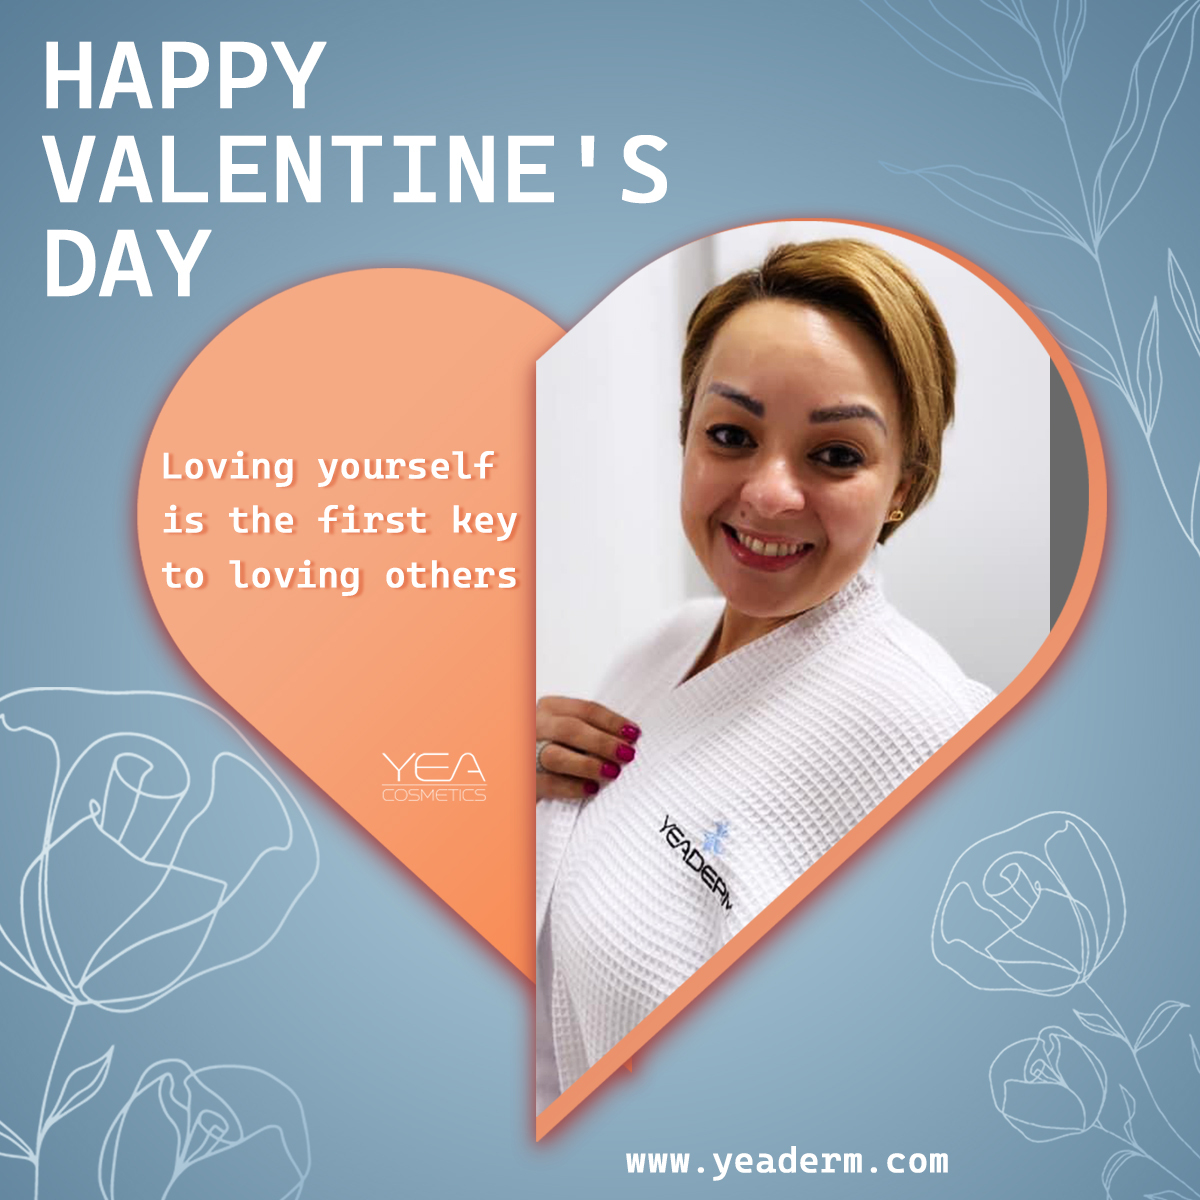 💝 SELF LOVE 👉 This is a love that we celebrate, more lasting than cards, chocolates, and flowers. This is a love that heals 🥰 Comment I LOVE MY SELF 👇#SelfLove2022 #SanValentinesDay #LawrenceMassachusetts